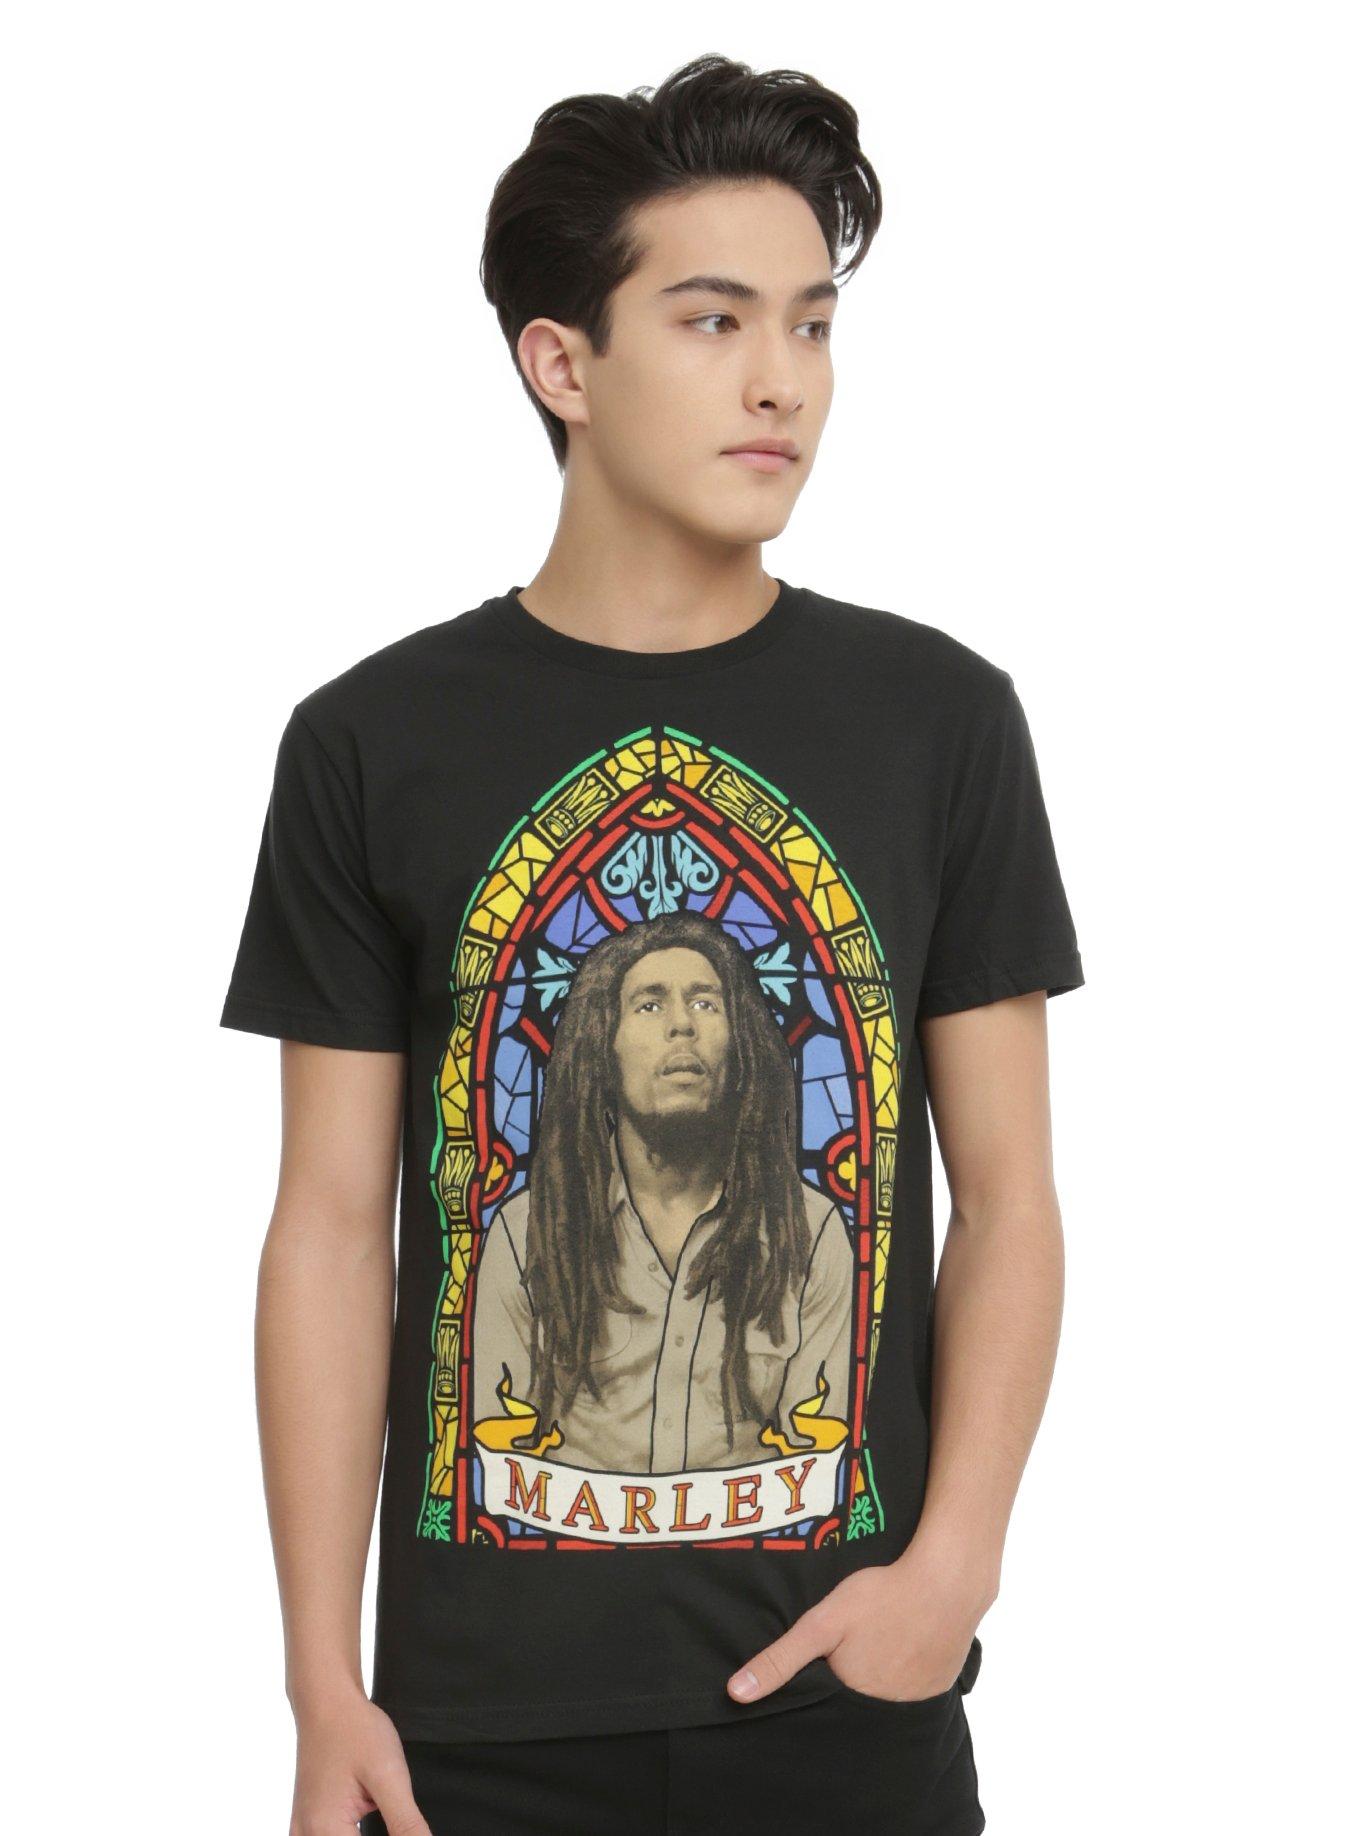 Bob Marley Stained Glass T-Shirt, BLACK, hi-res